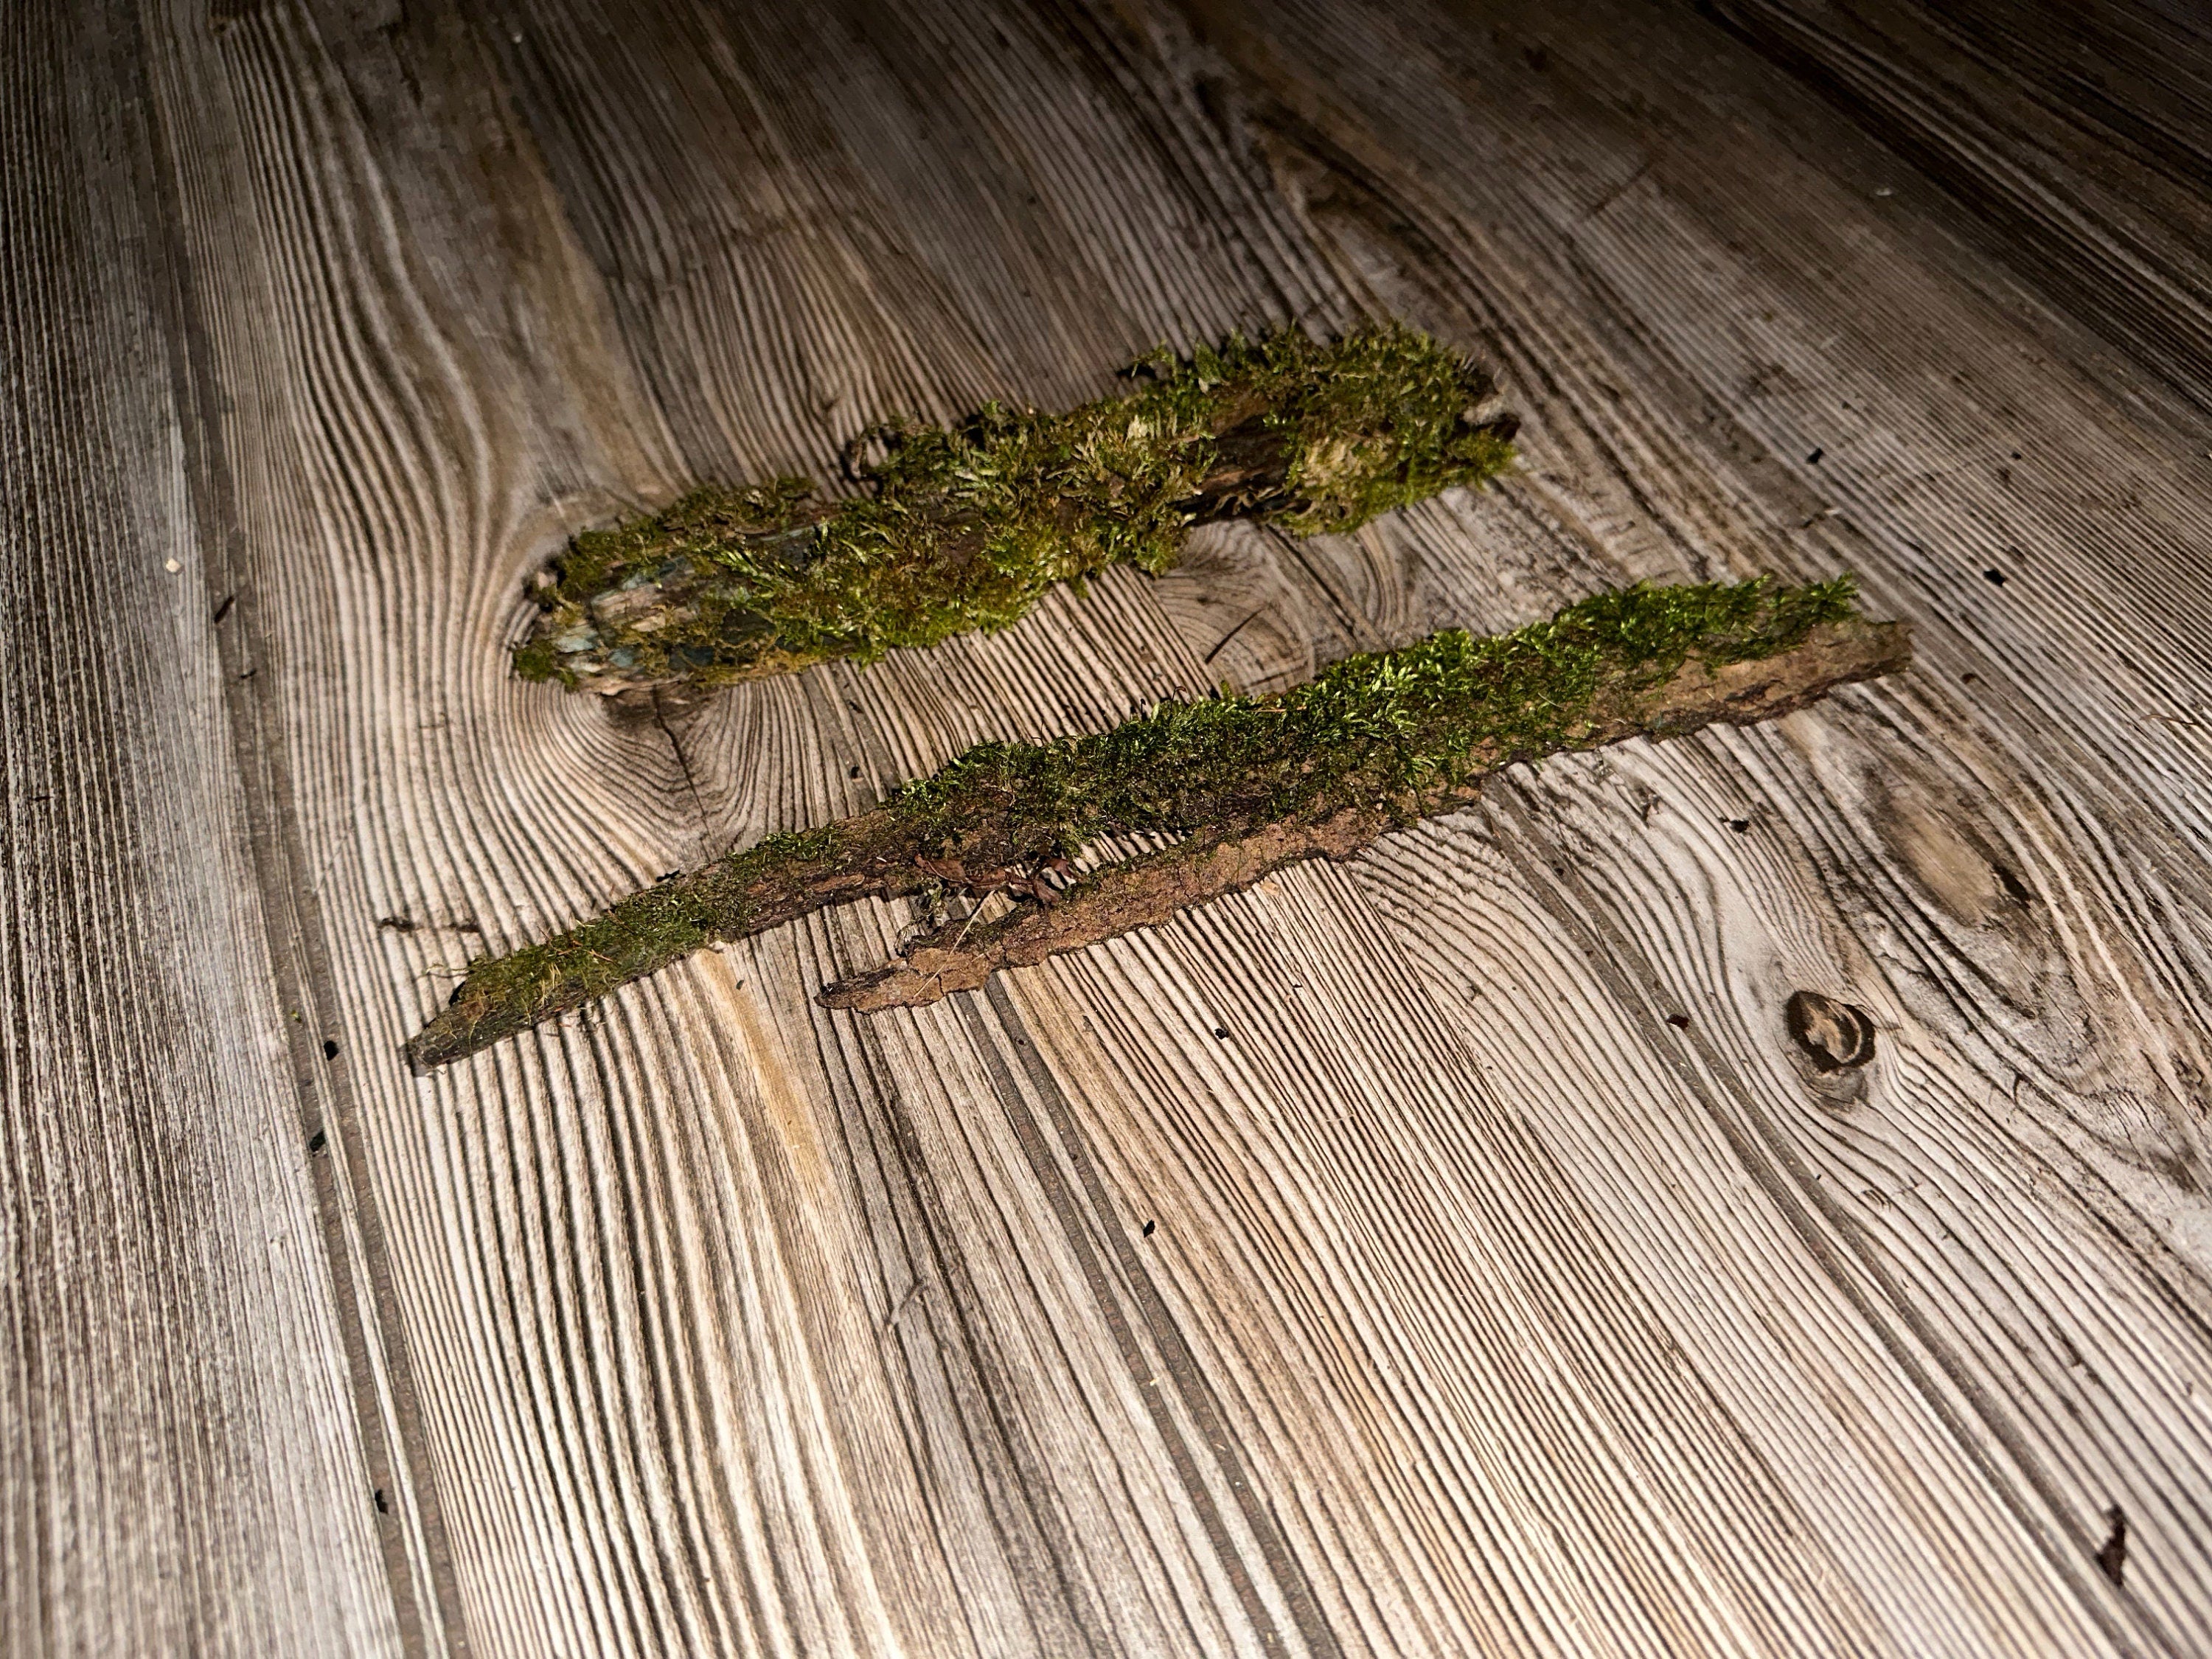 Two Mossy Sticks, Moss Sticks, Approximately 11 Inches x 1.5 inches x 1 Inch in Size